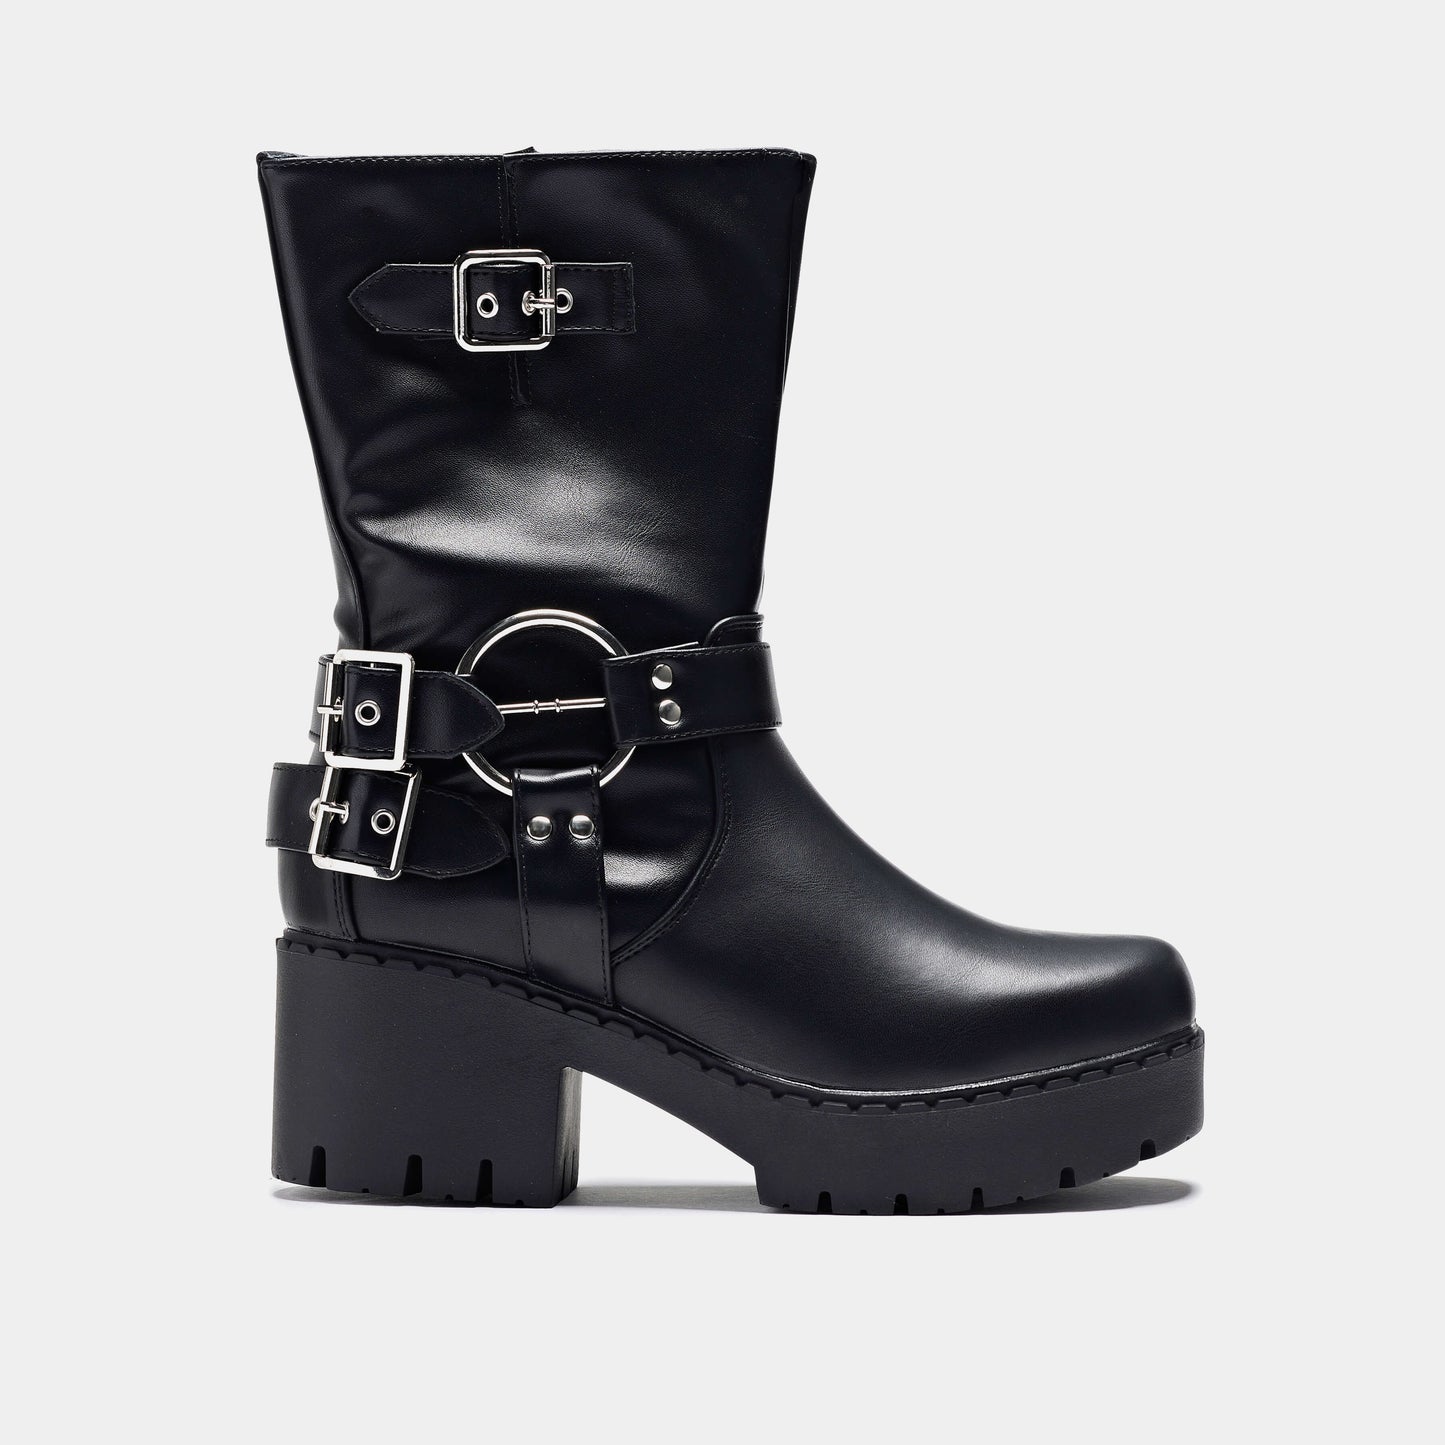 Oblivion Grunge Switch Boots - Ankle Boots - KOI Footwear - Black - Side View